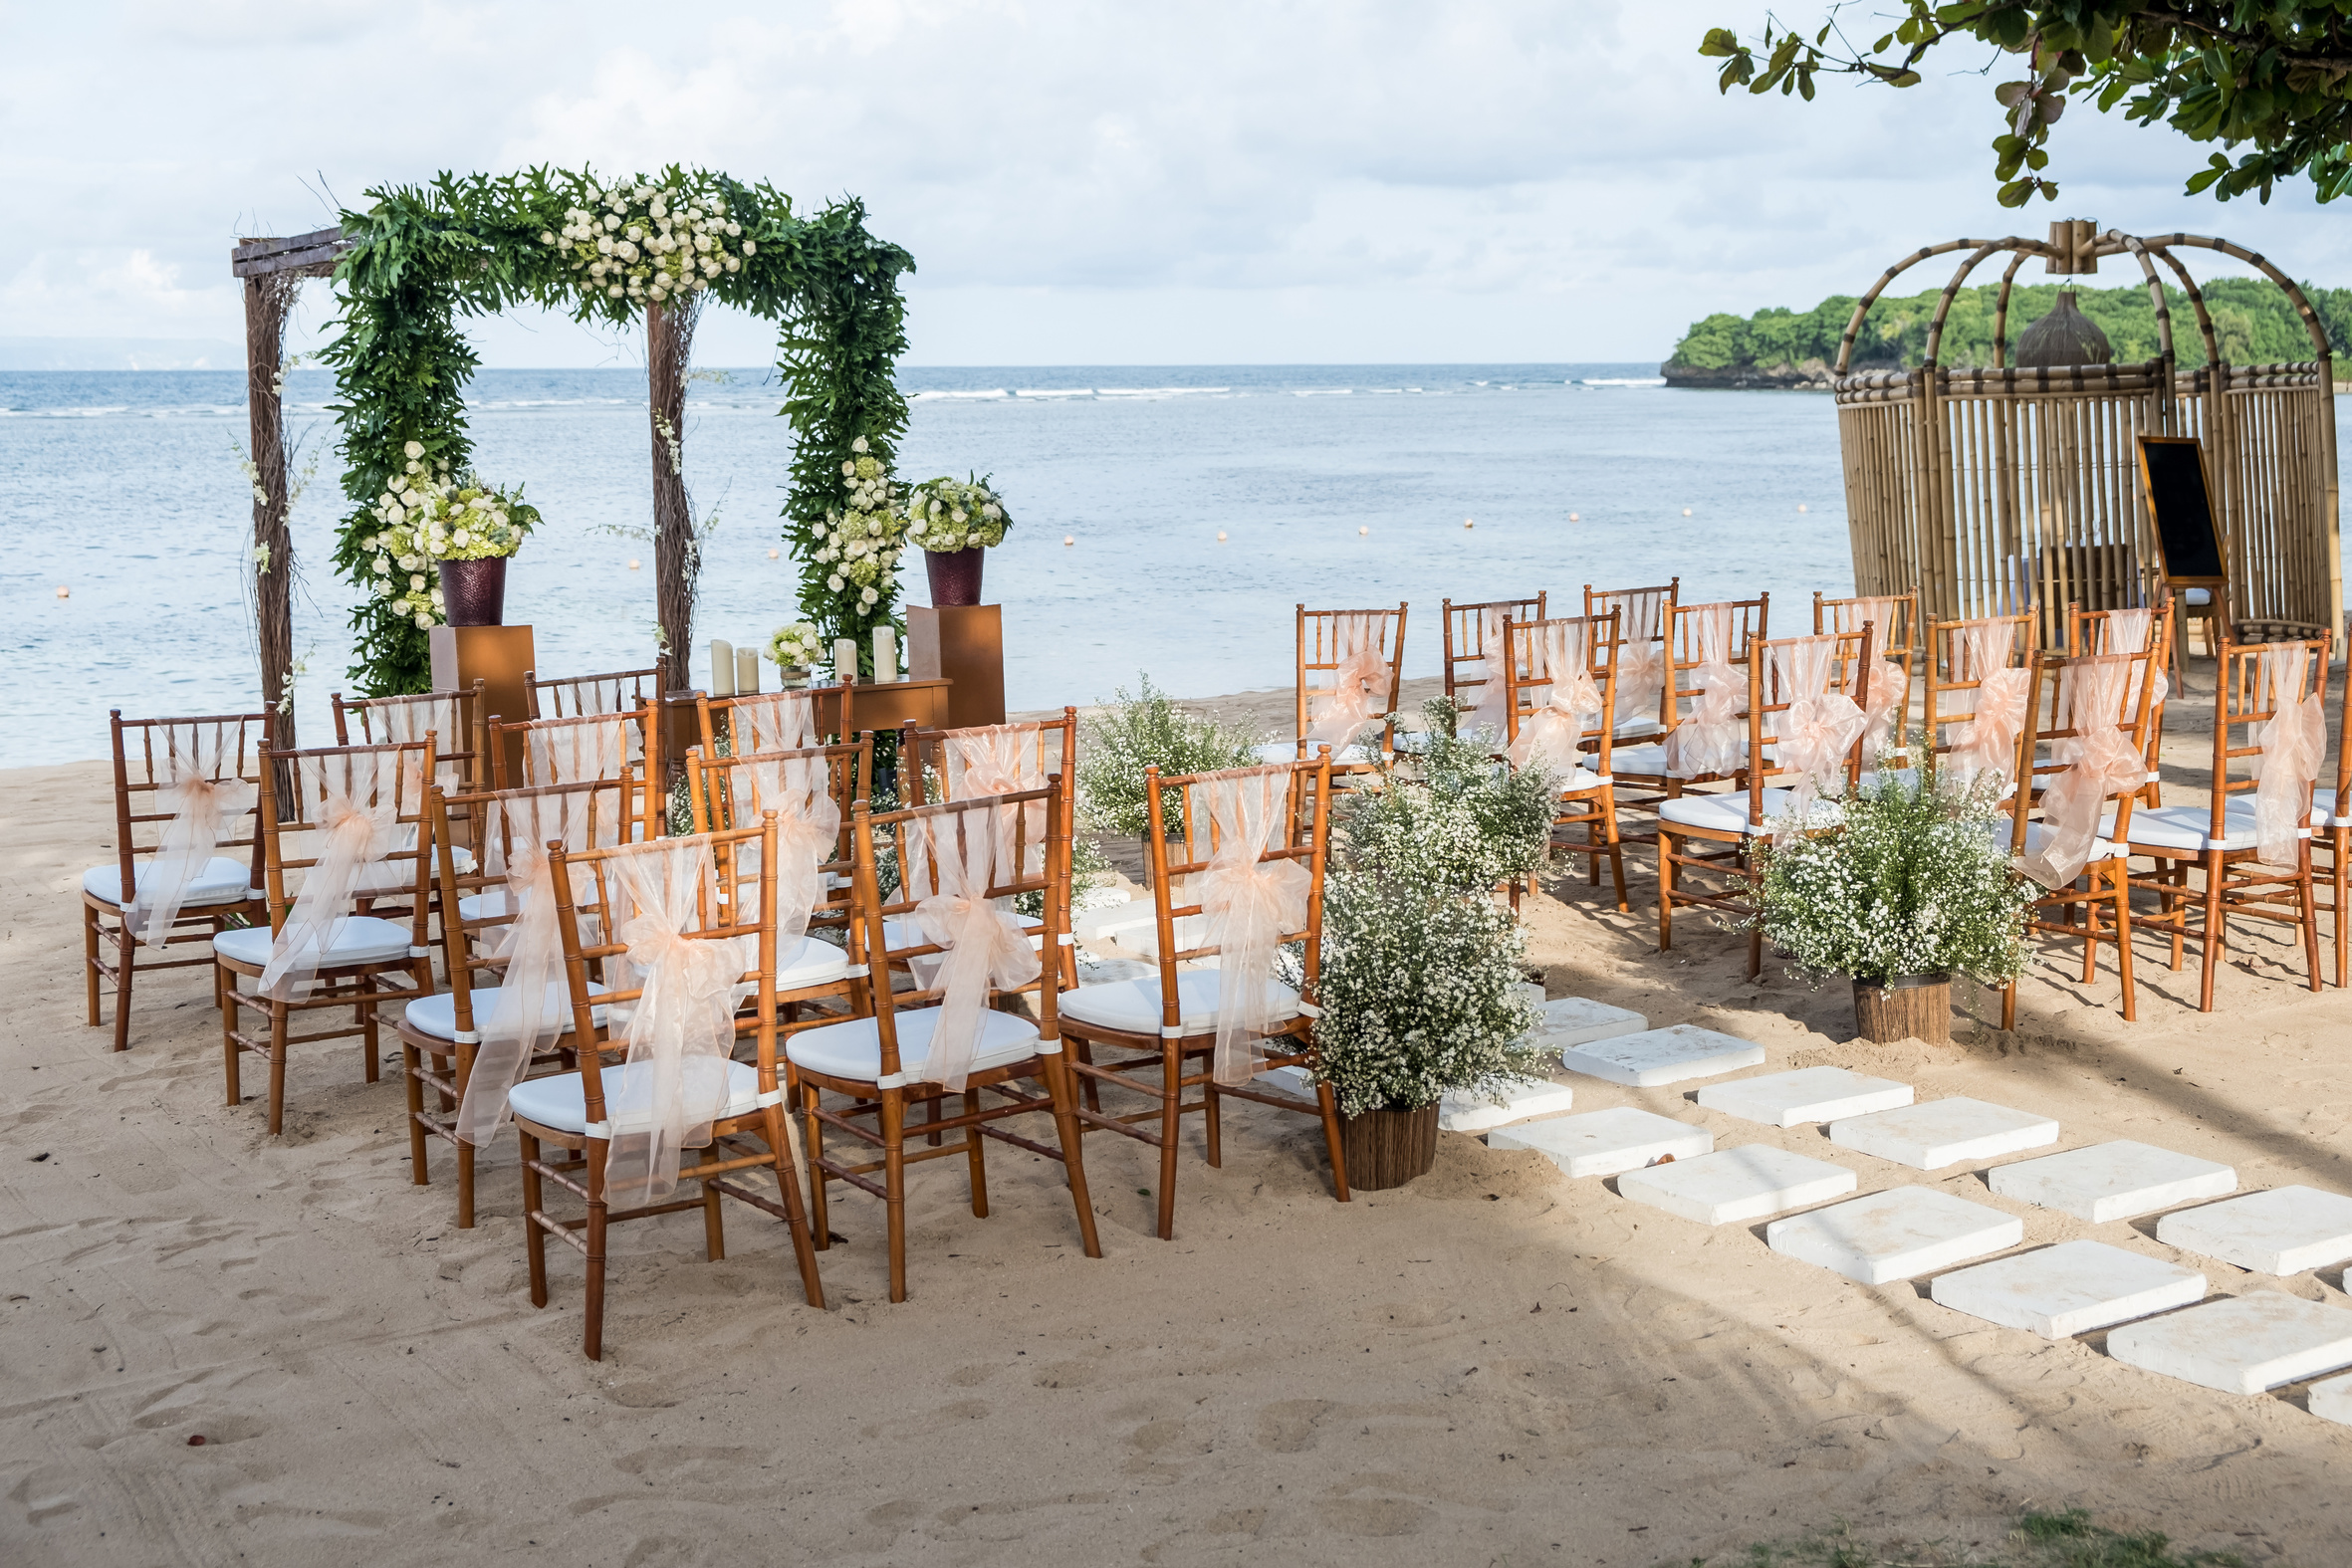 Beautiful wedding ceremony on the beach. Tropical exotic destination wedding concept